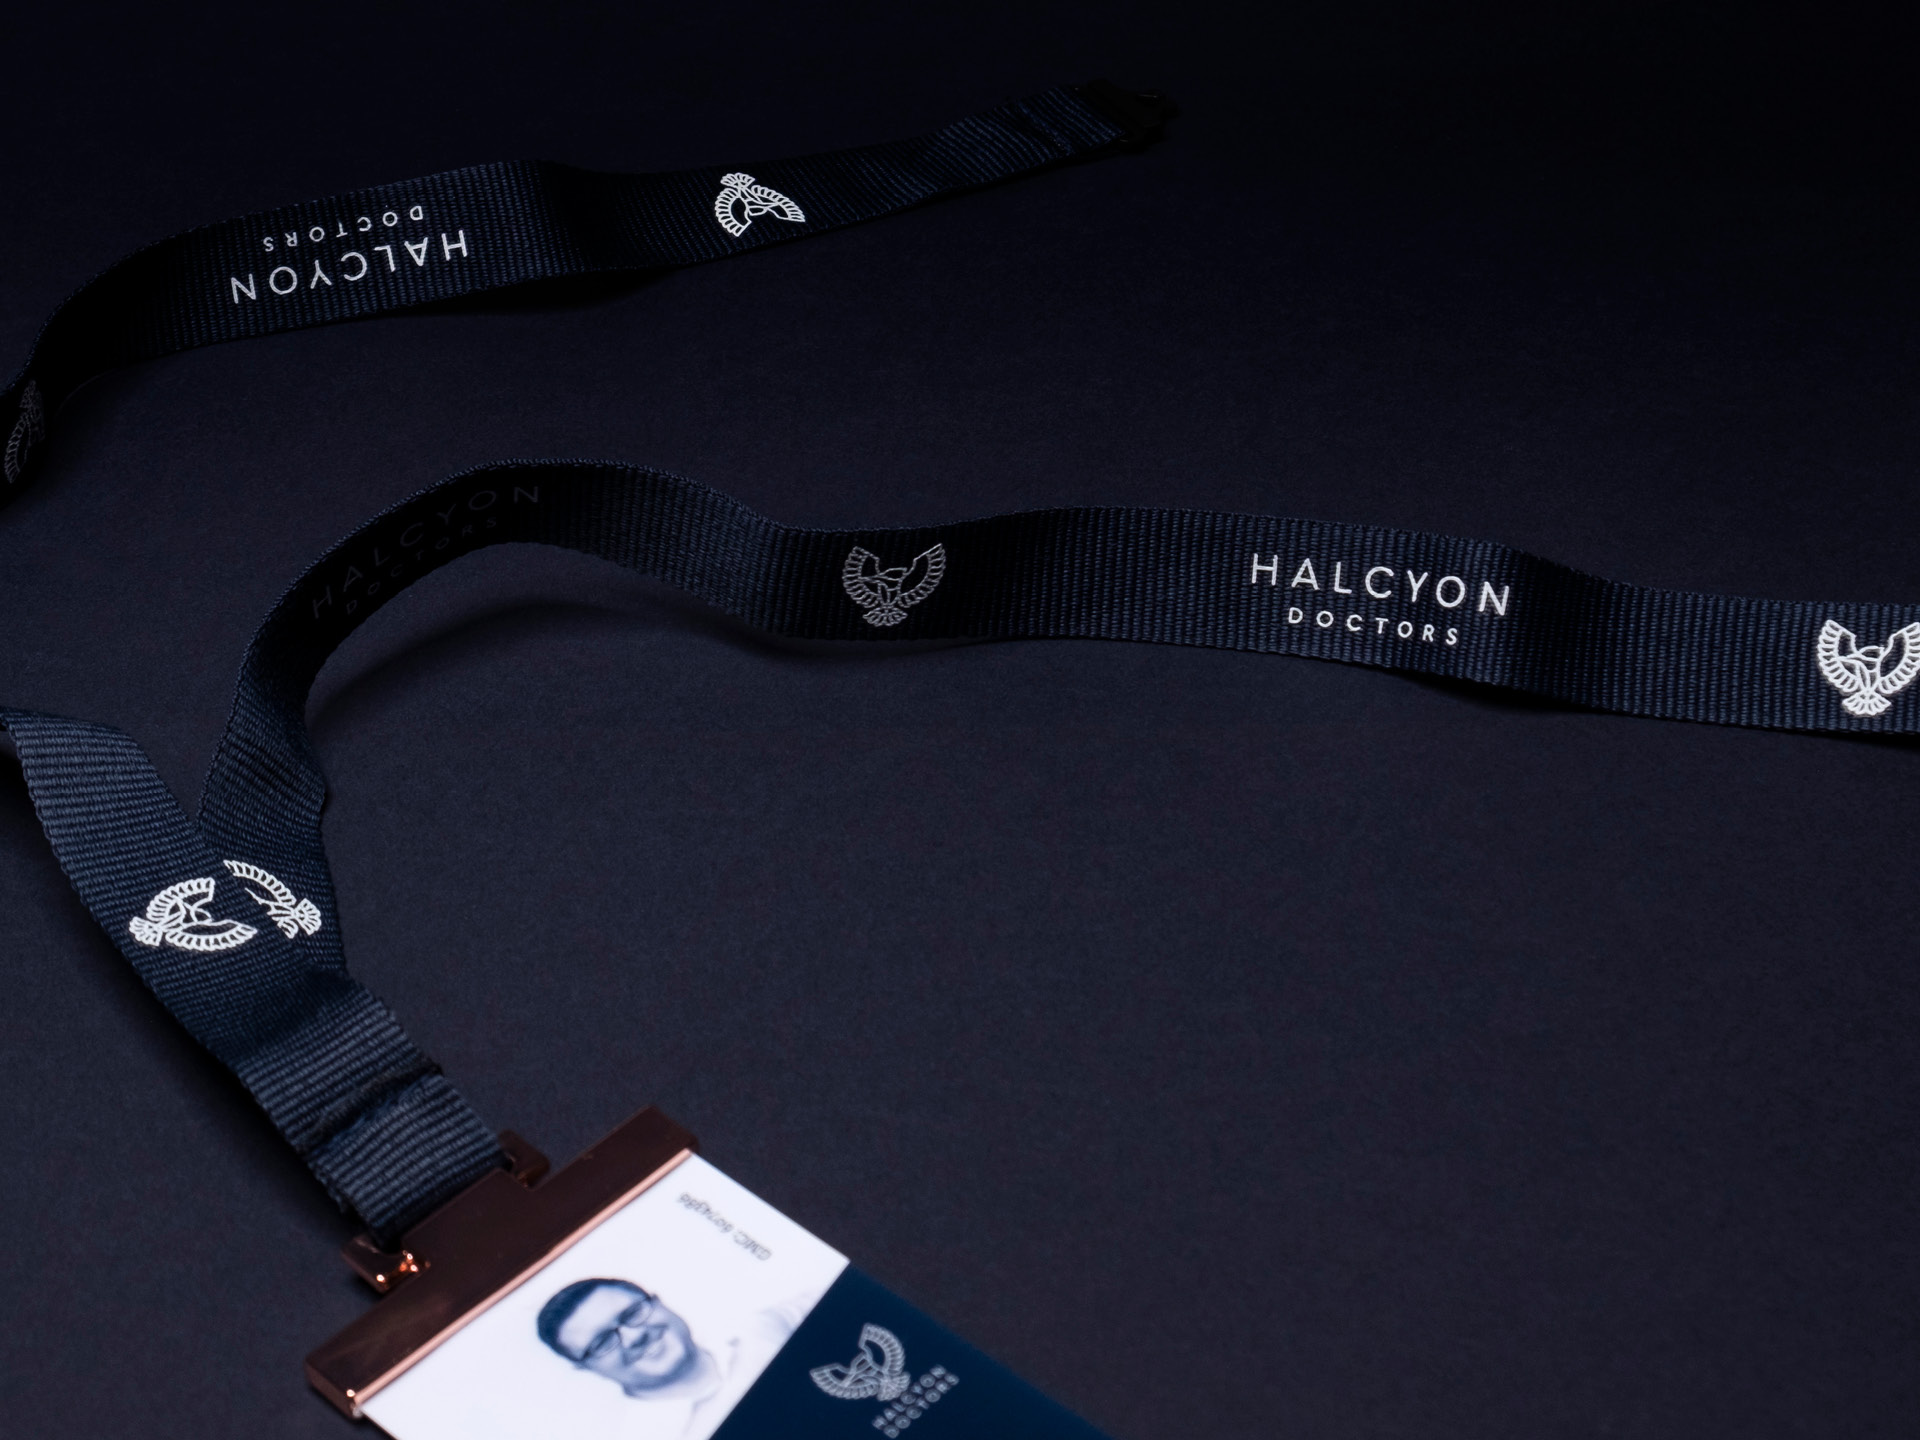 A halcyon doctors branded lanyard and identification badge with a metallic copper clip